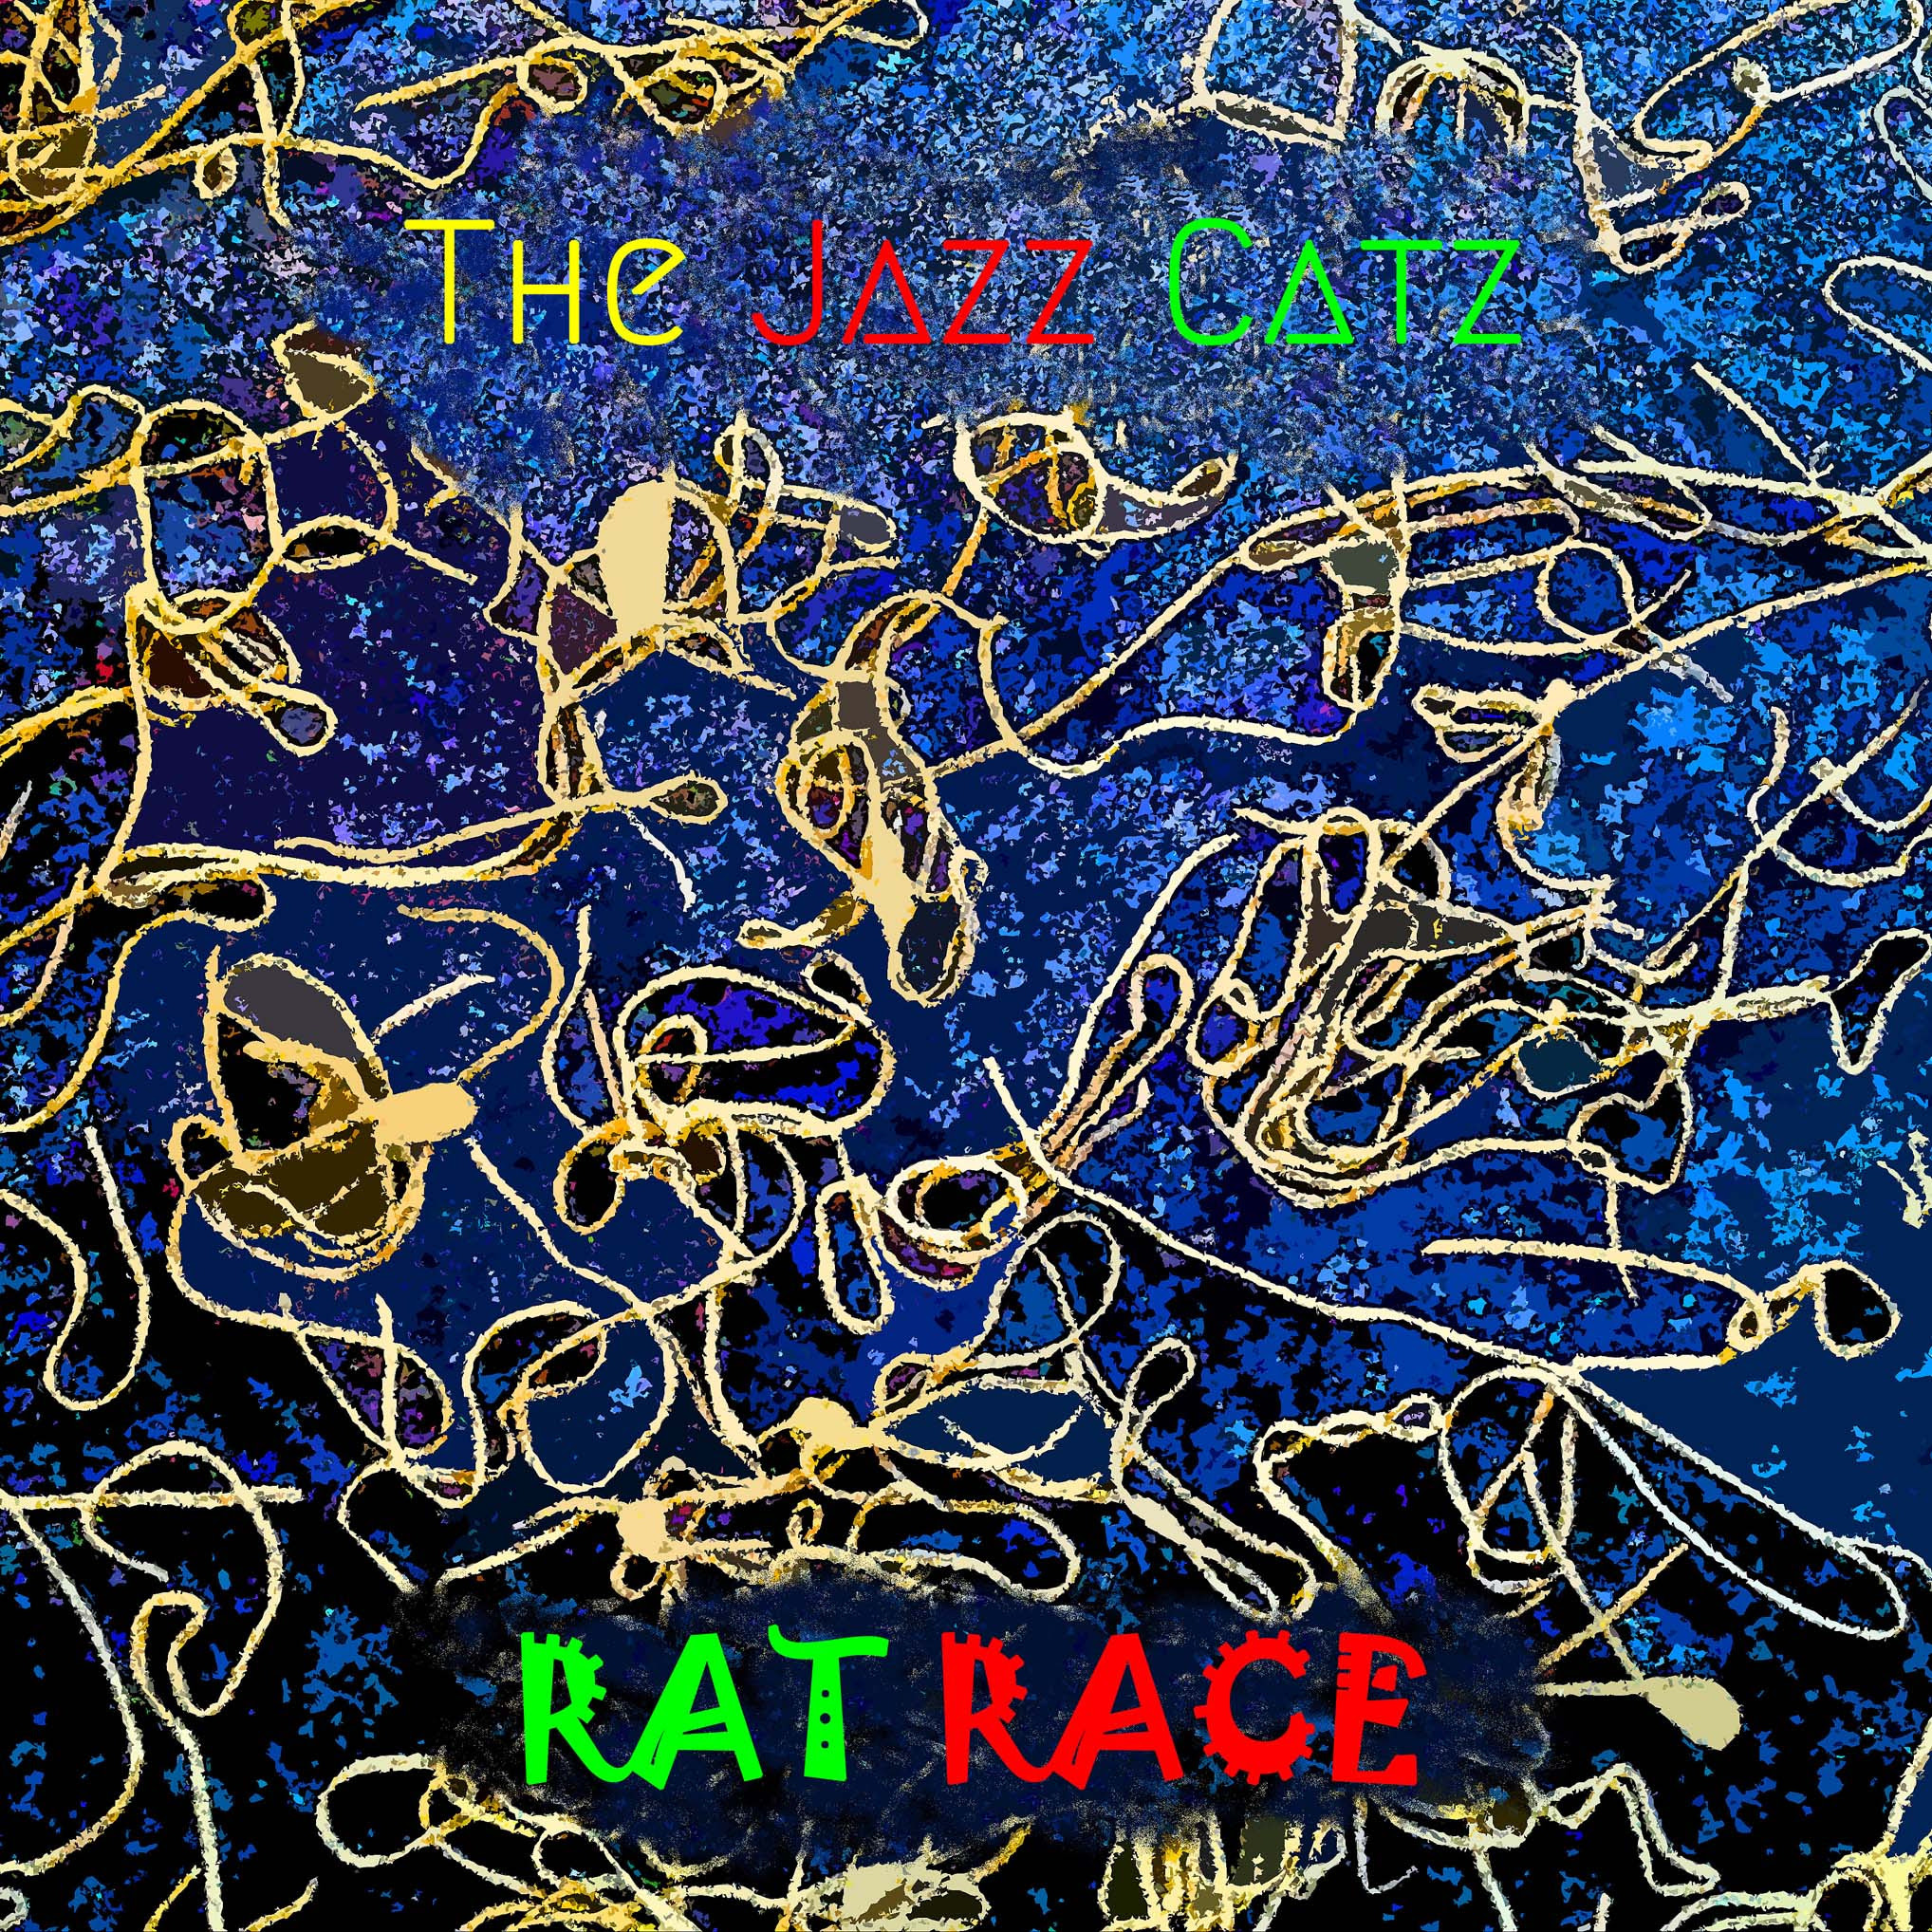 Reinventing The Colorful World Of Jazz Music Through Fresh Groovy Beats- The Jazz Catz Unveils New Single “Rat Race”